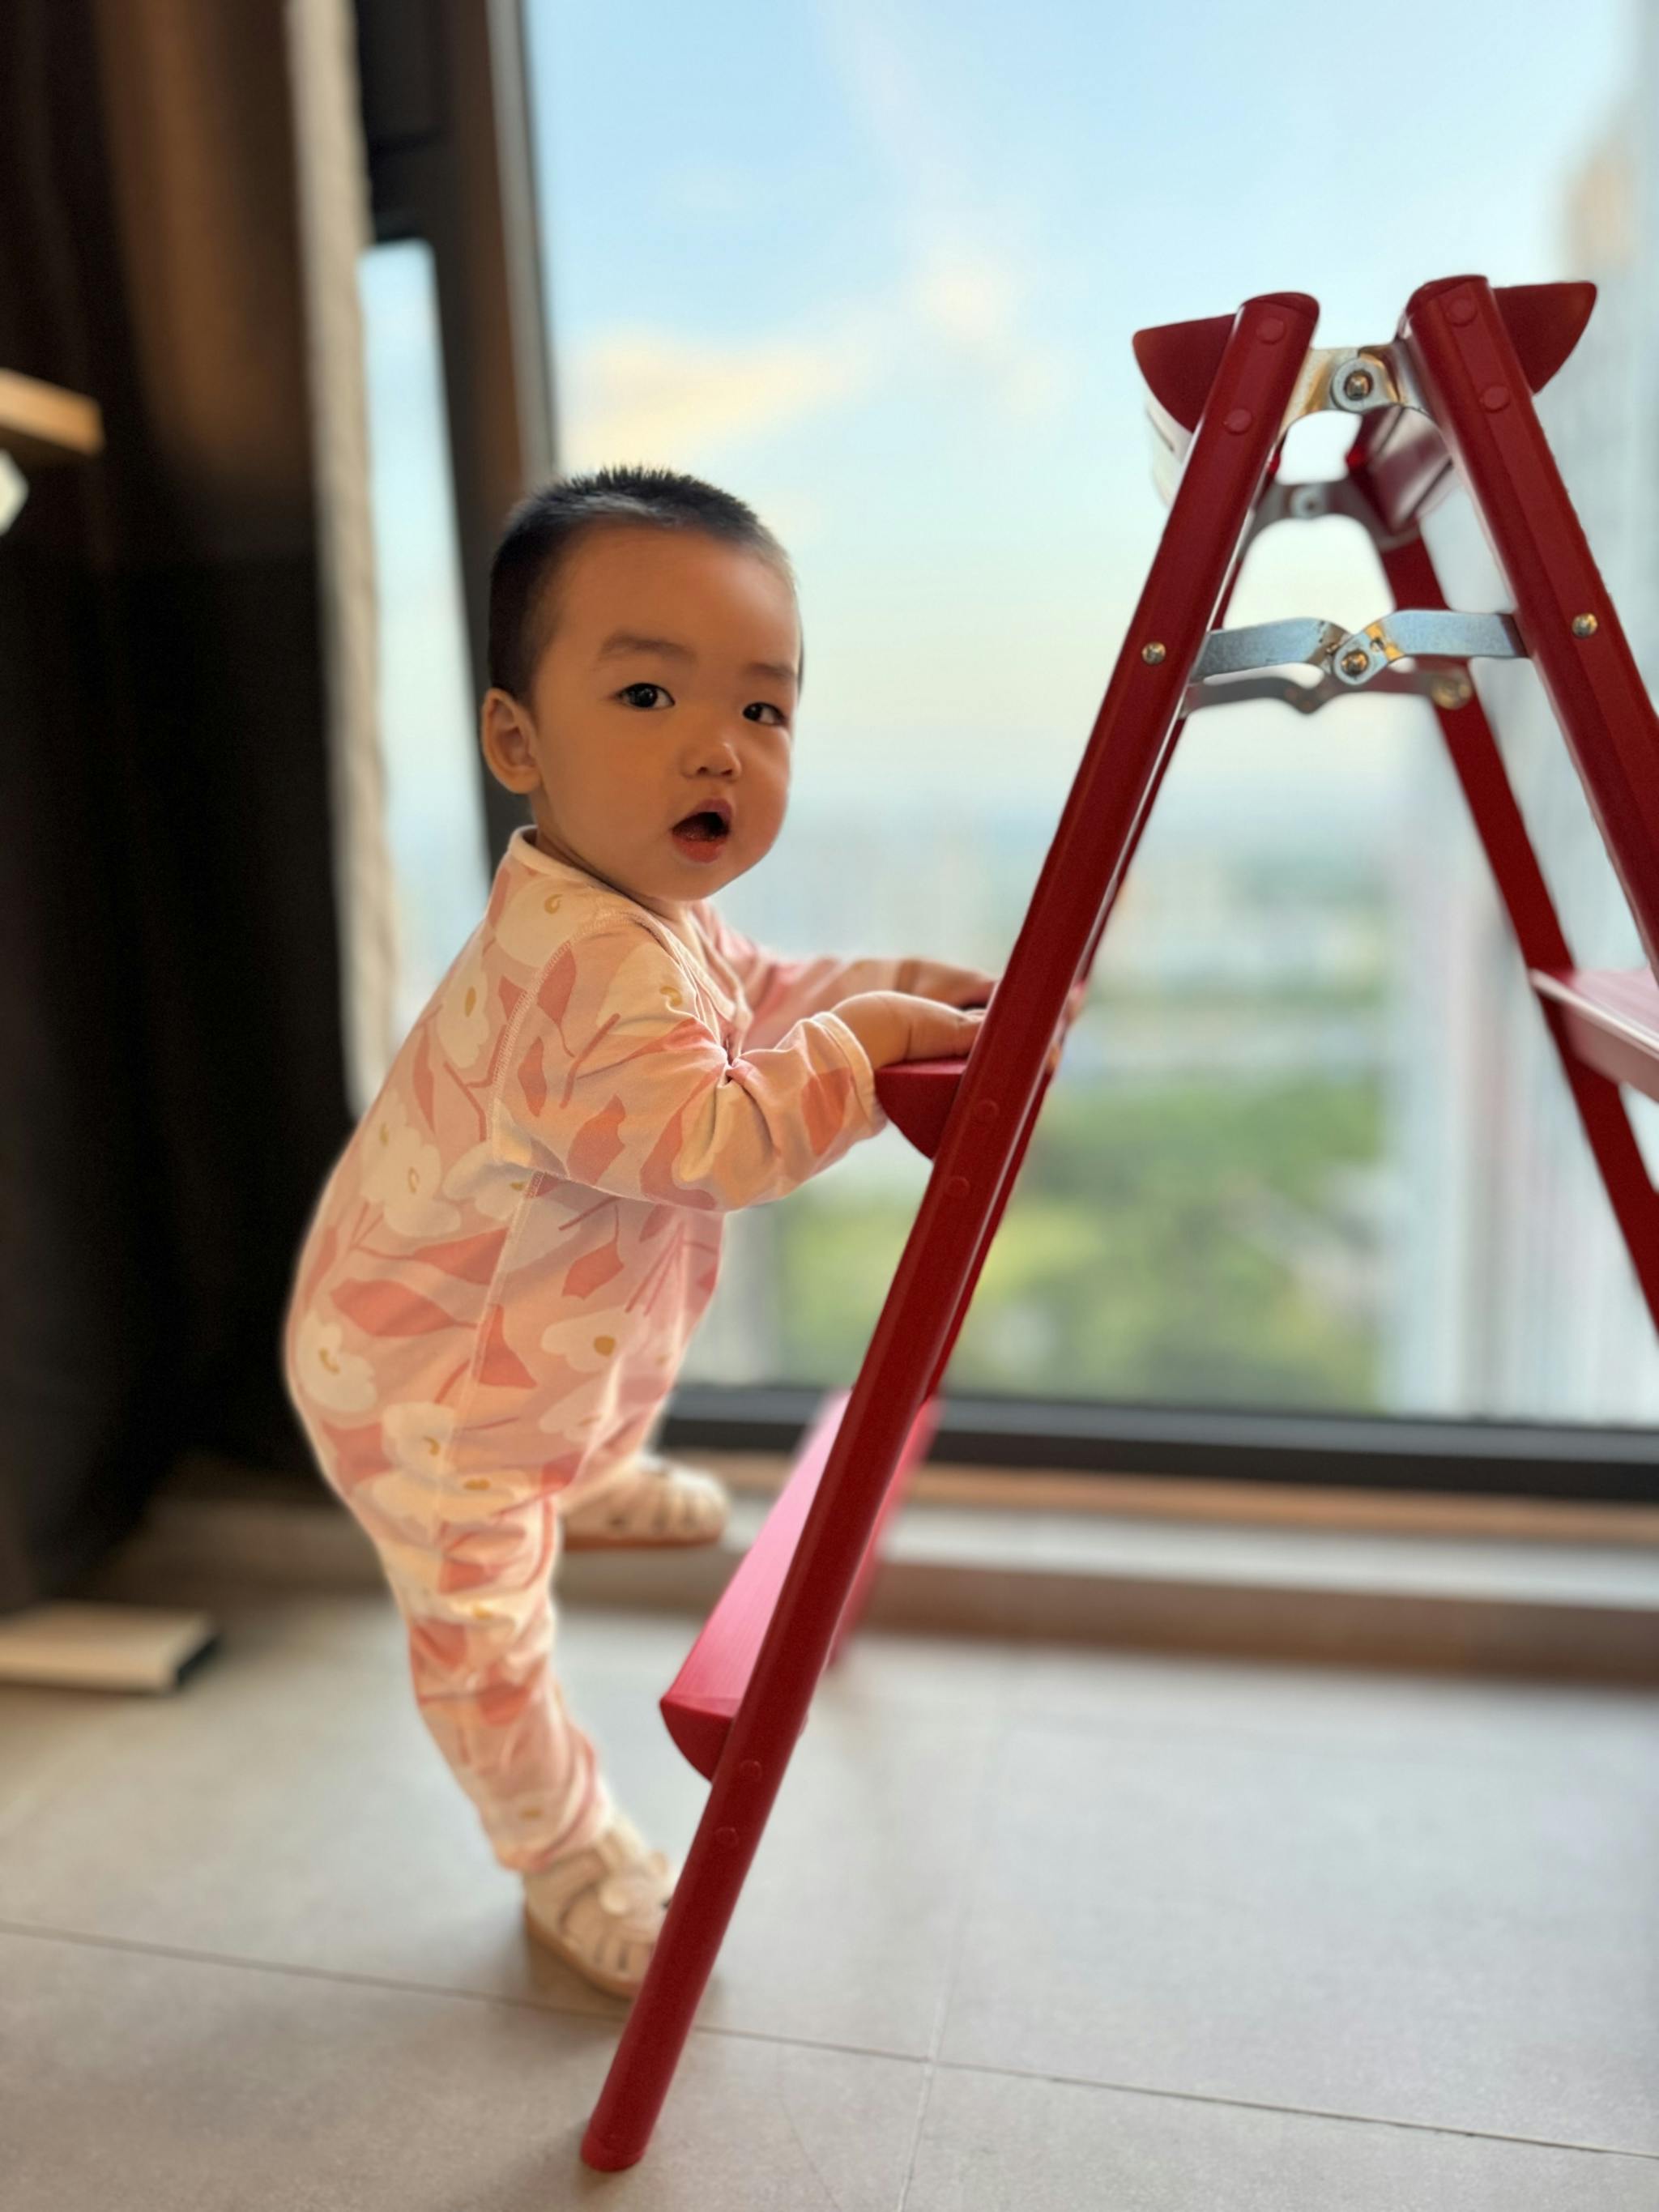 A toddler in pink pajamas stands by a red ladder near a window, looking toward the camera